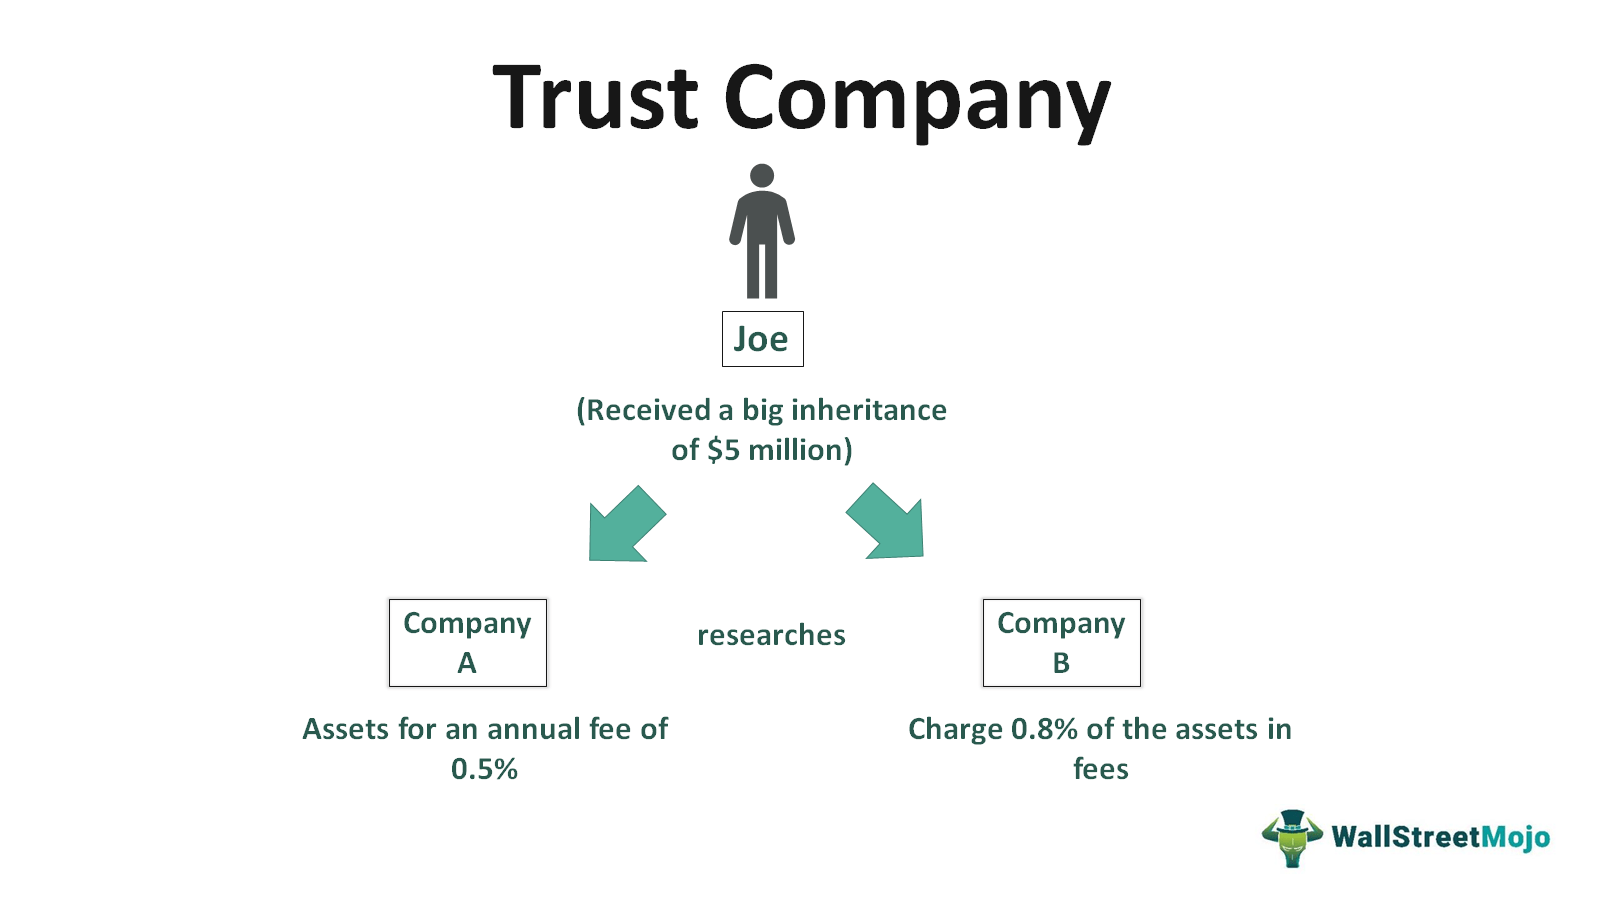 Trust Company - Definition, Services, How Does it Work?